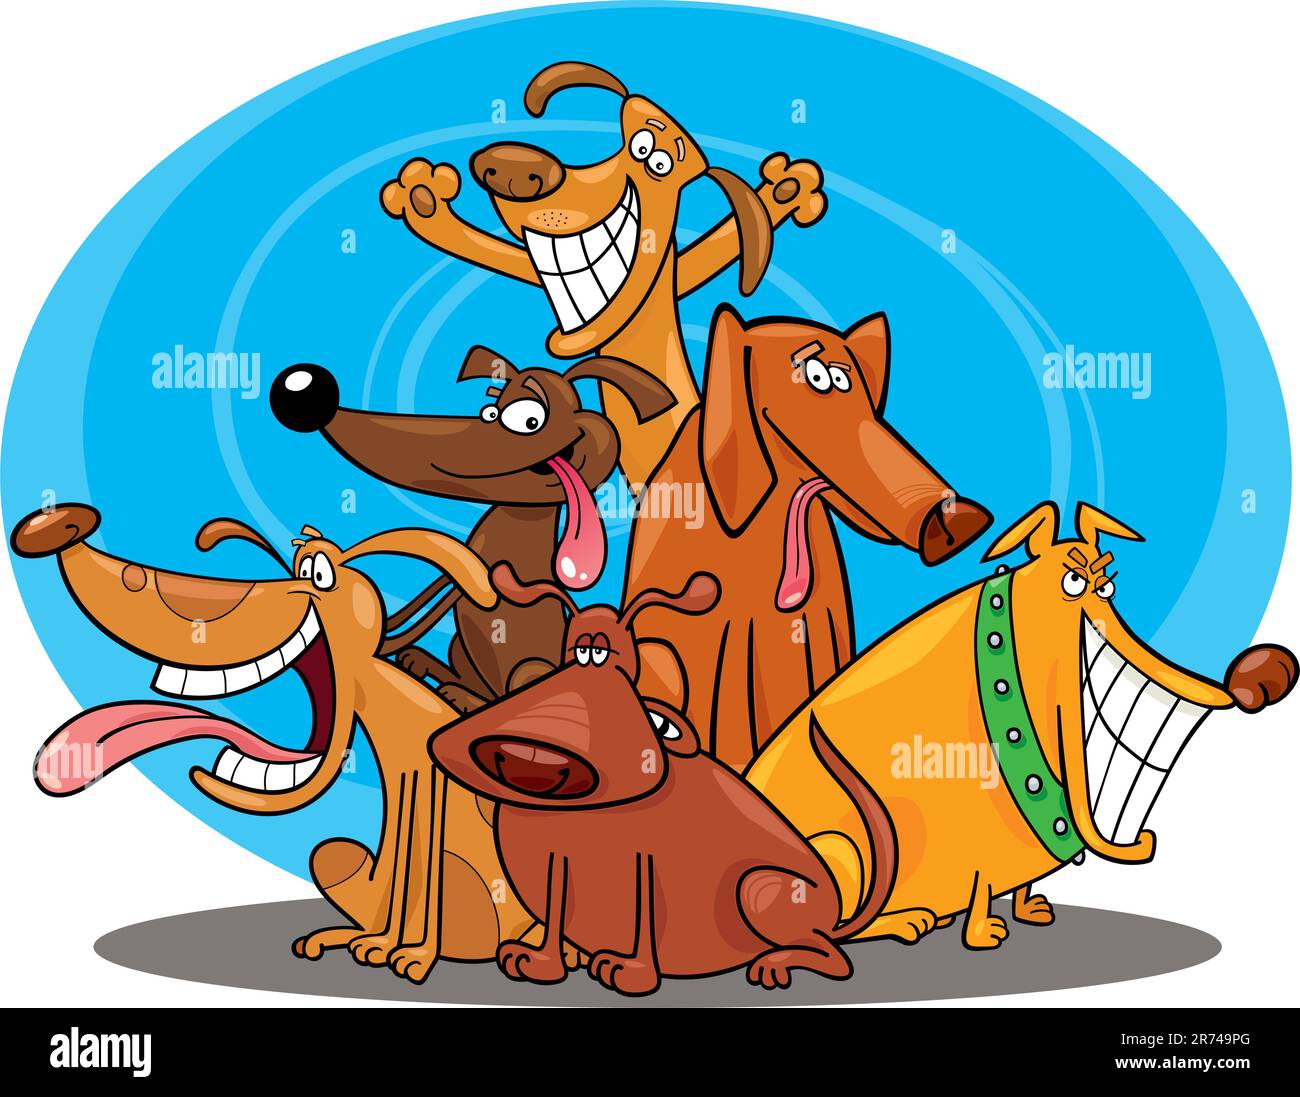 cartoon illustration of funny dogs group Stock Vector